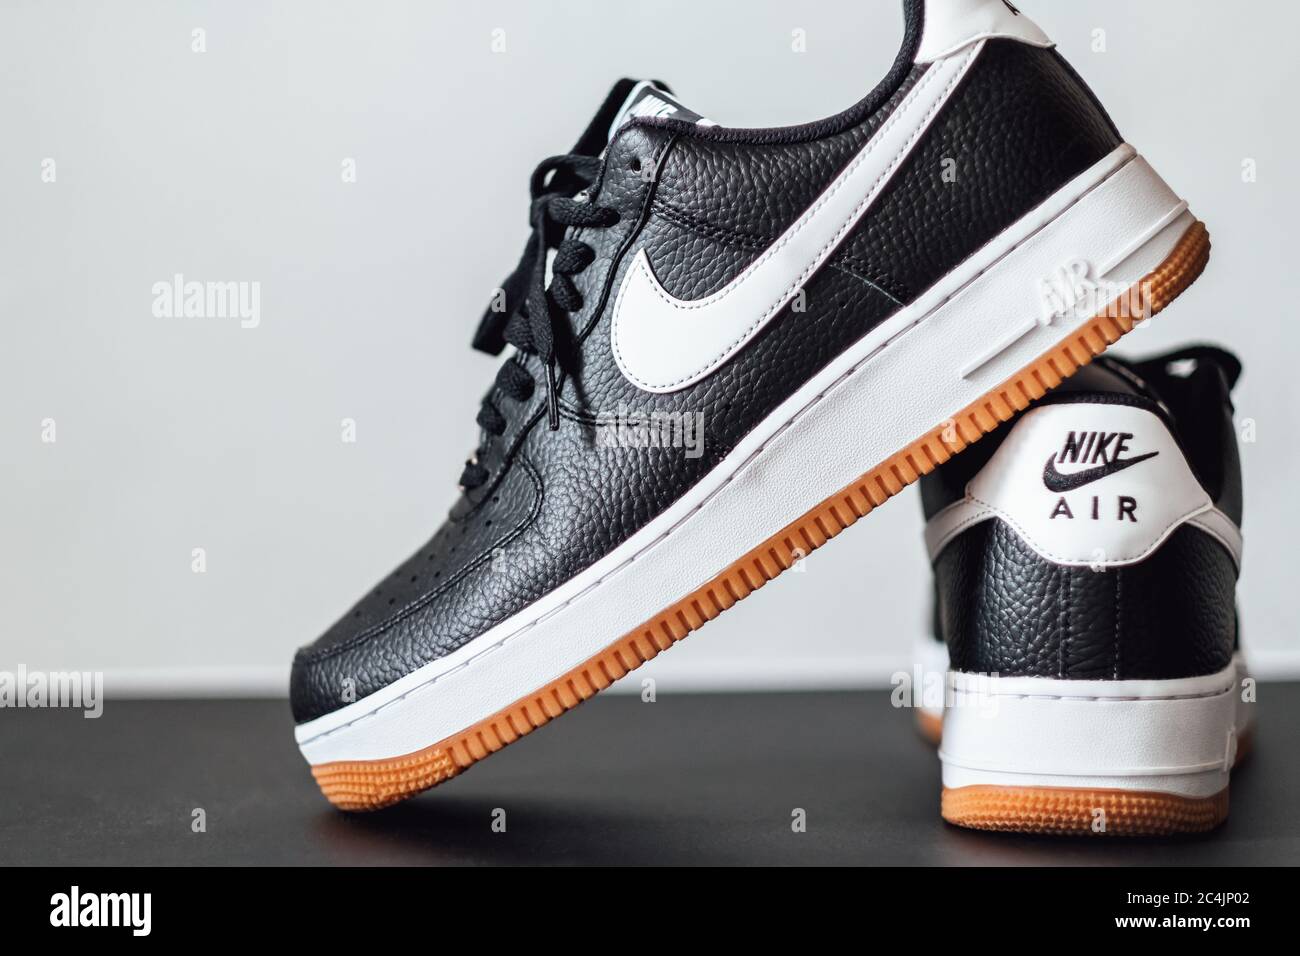 Official Images: Nike Air Force 1 Low Black/White - Sneaker Freaker